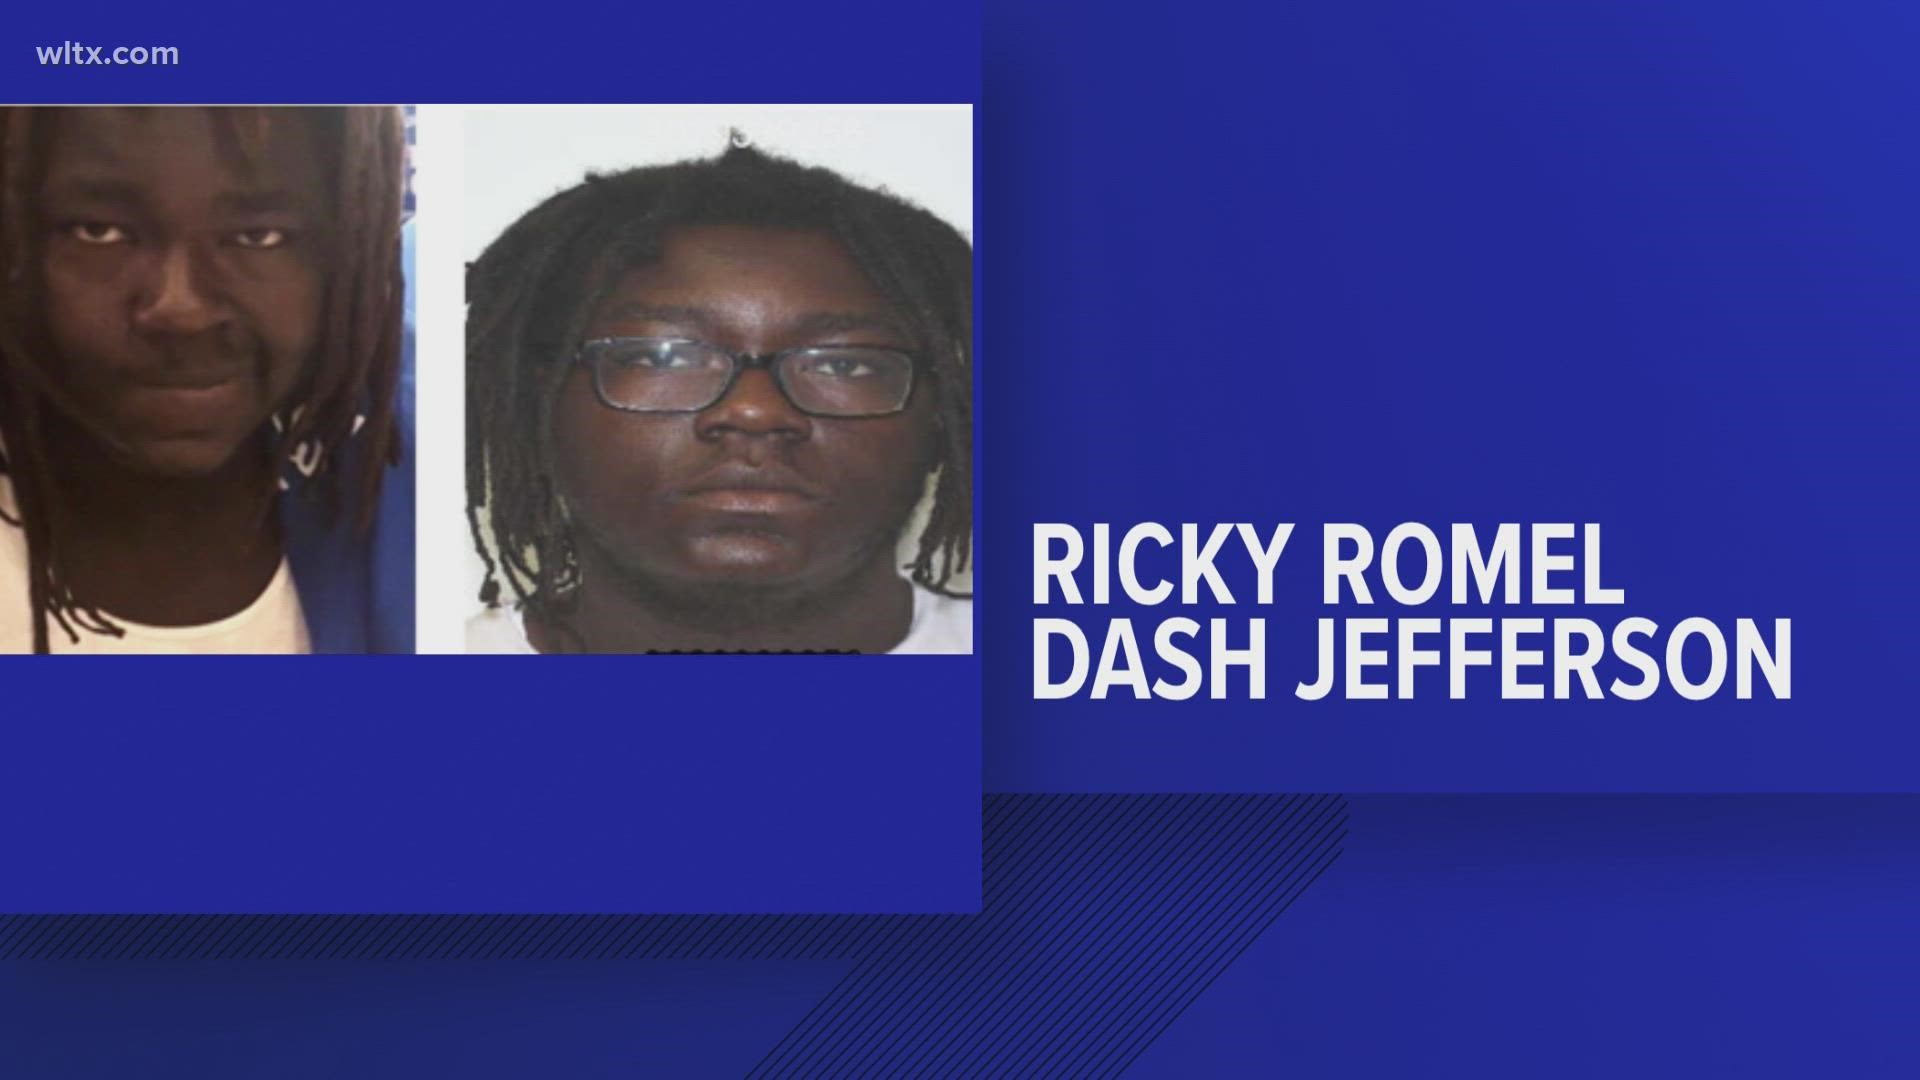 Deputies say 20-year-old Ricky Romel Dash Jefferson was last seen November 7, 2022, when he walked from his Mayesville home on Avenue A.